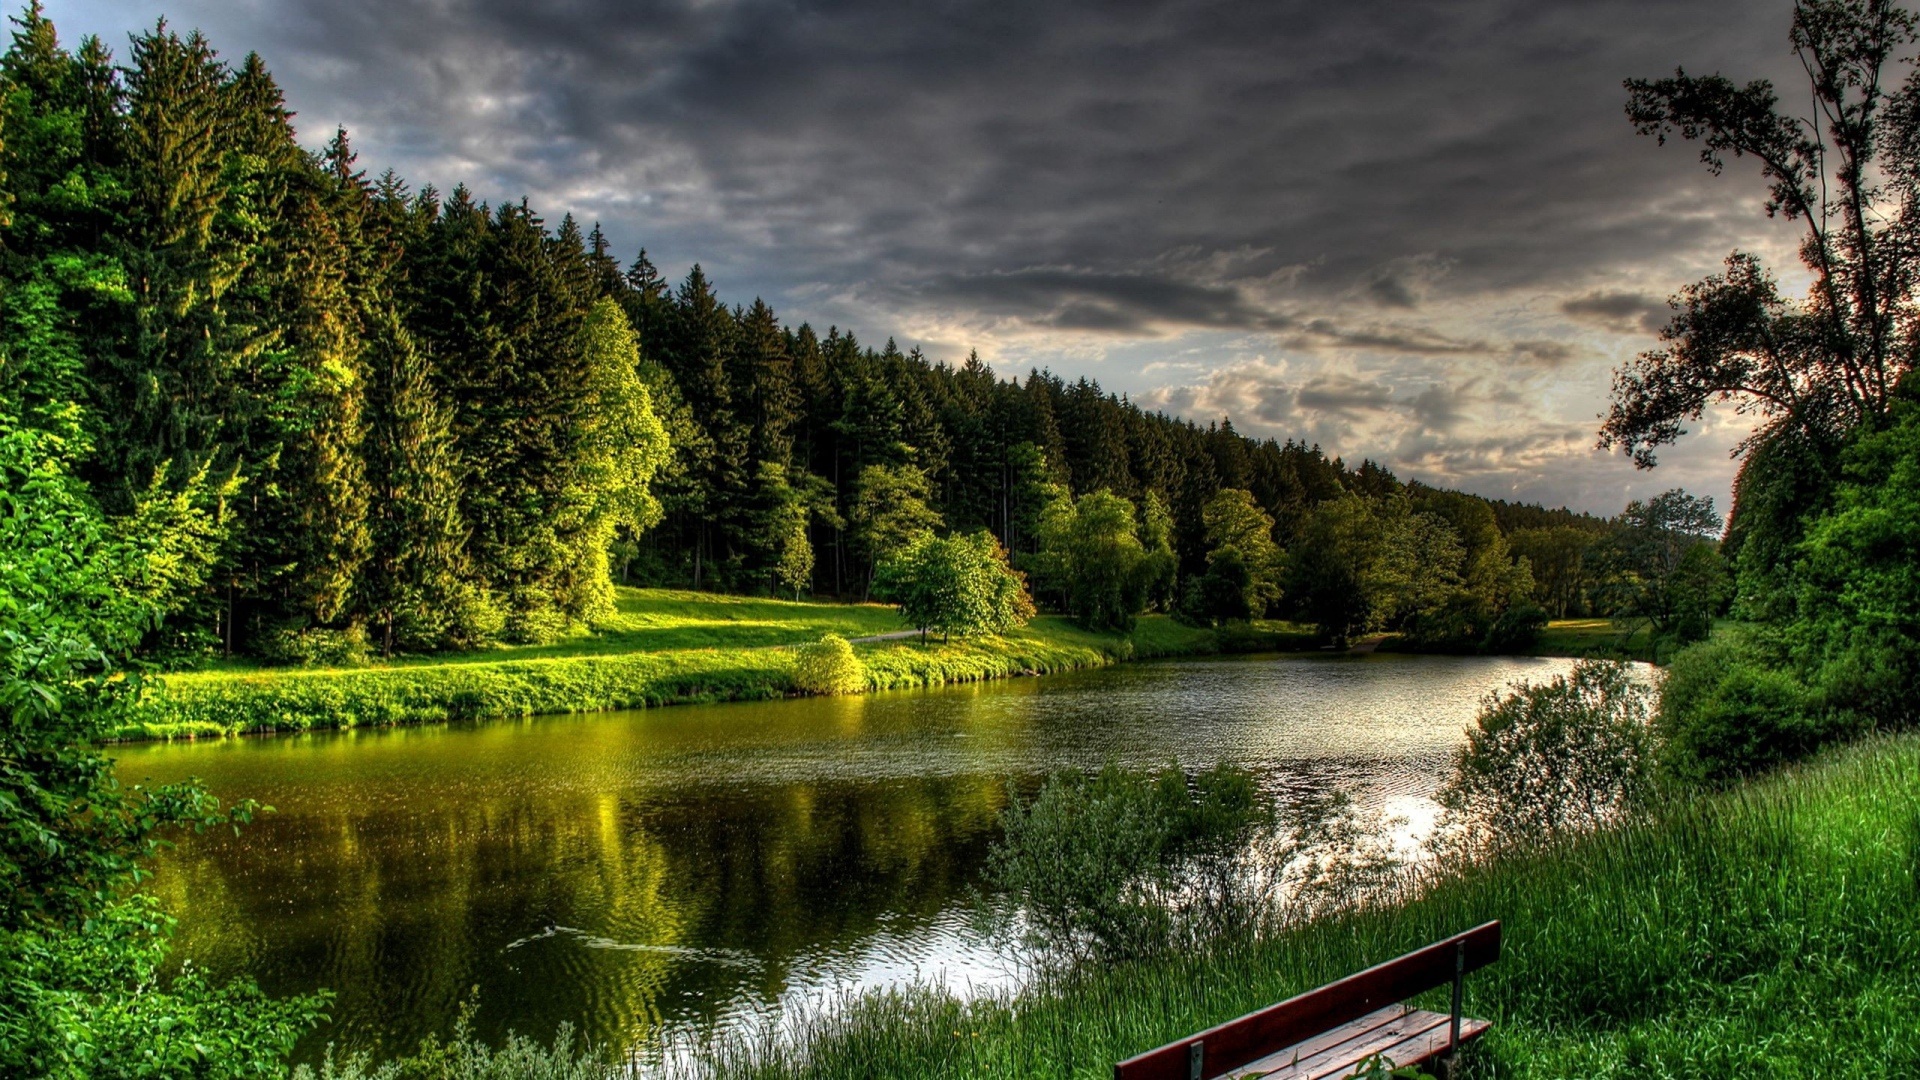 Download wallpaper 1920x1080 river, summer, bench, trees HD background